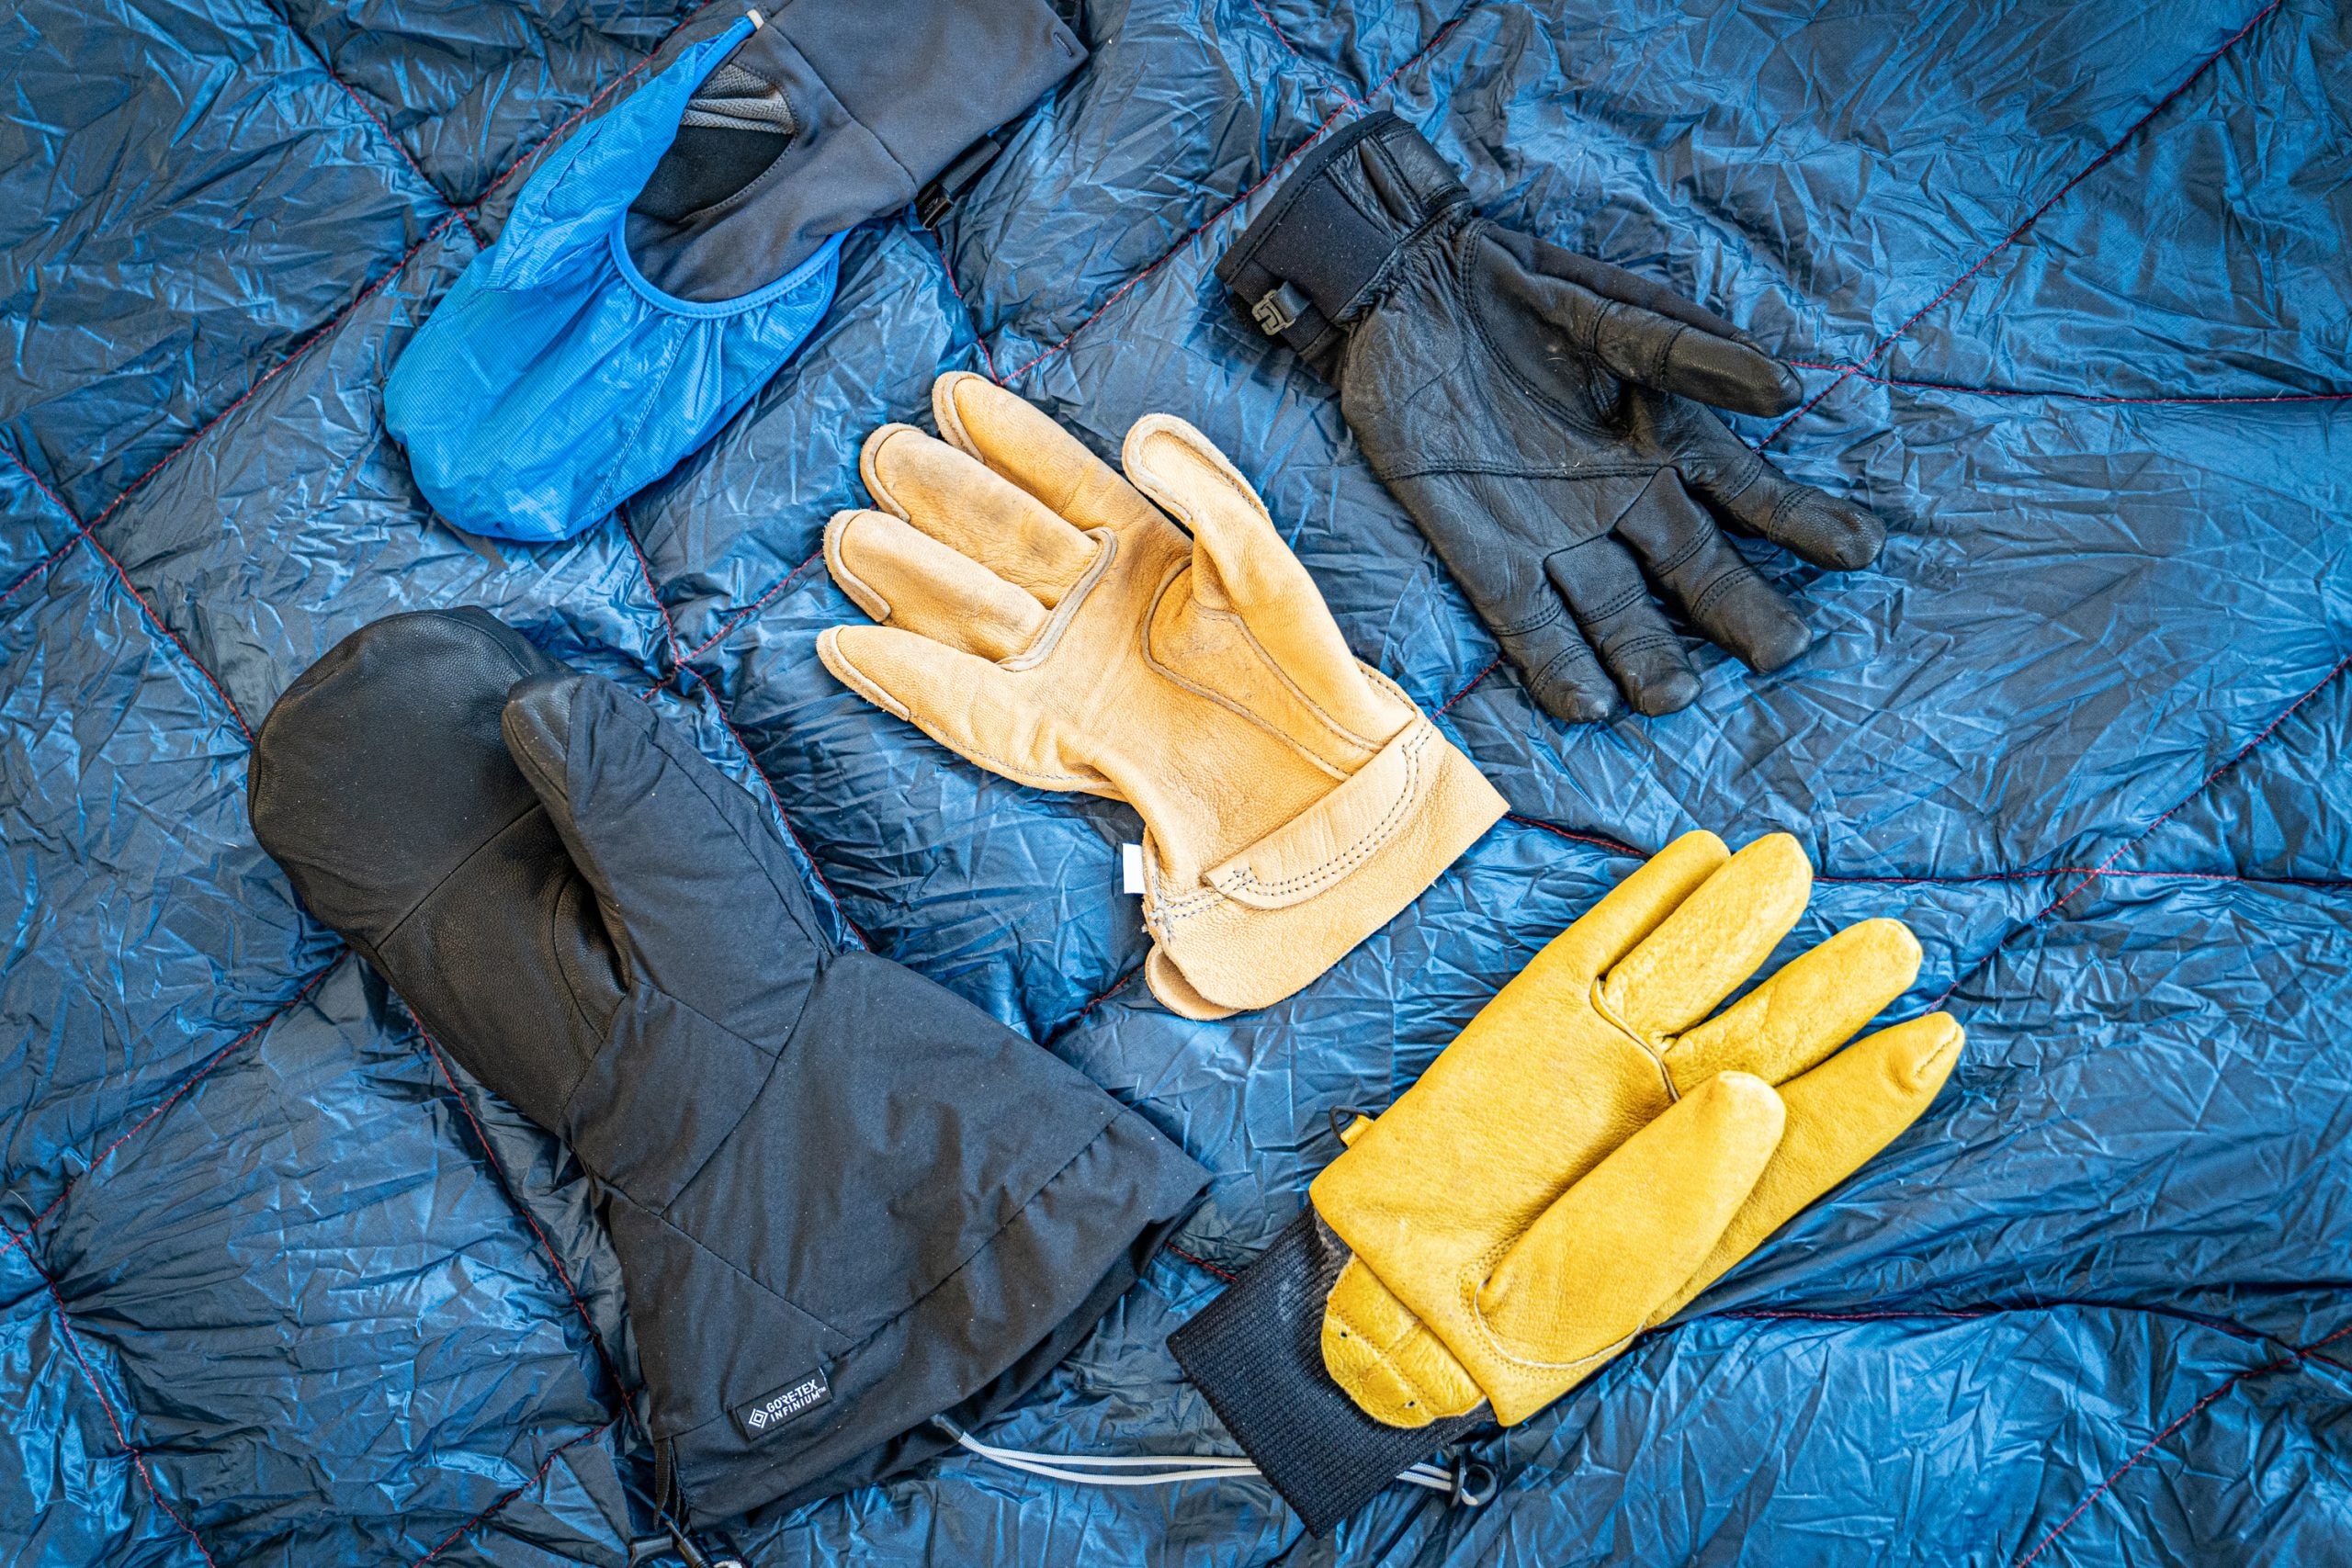 Warm gloves for every adventure